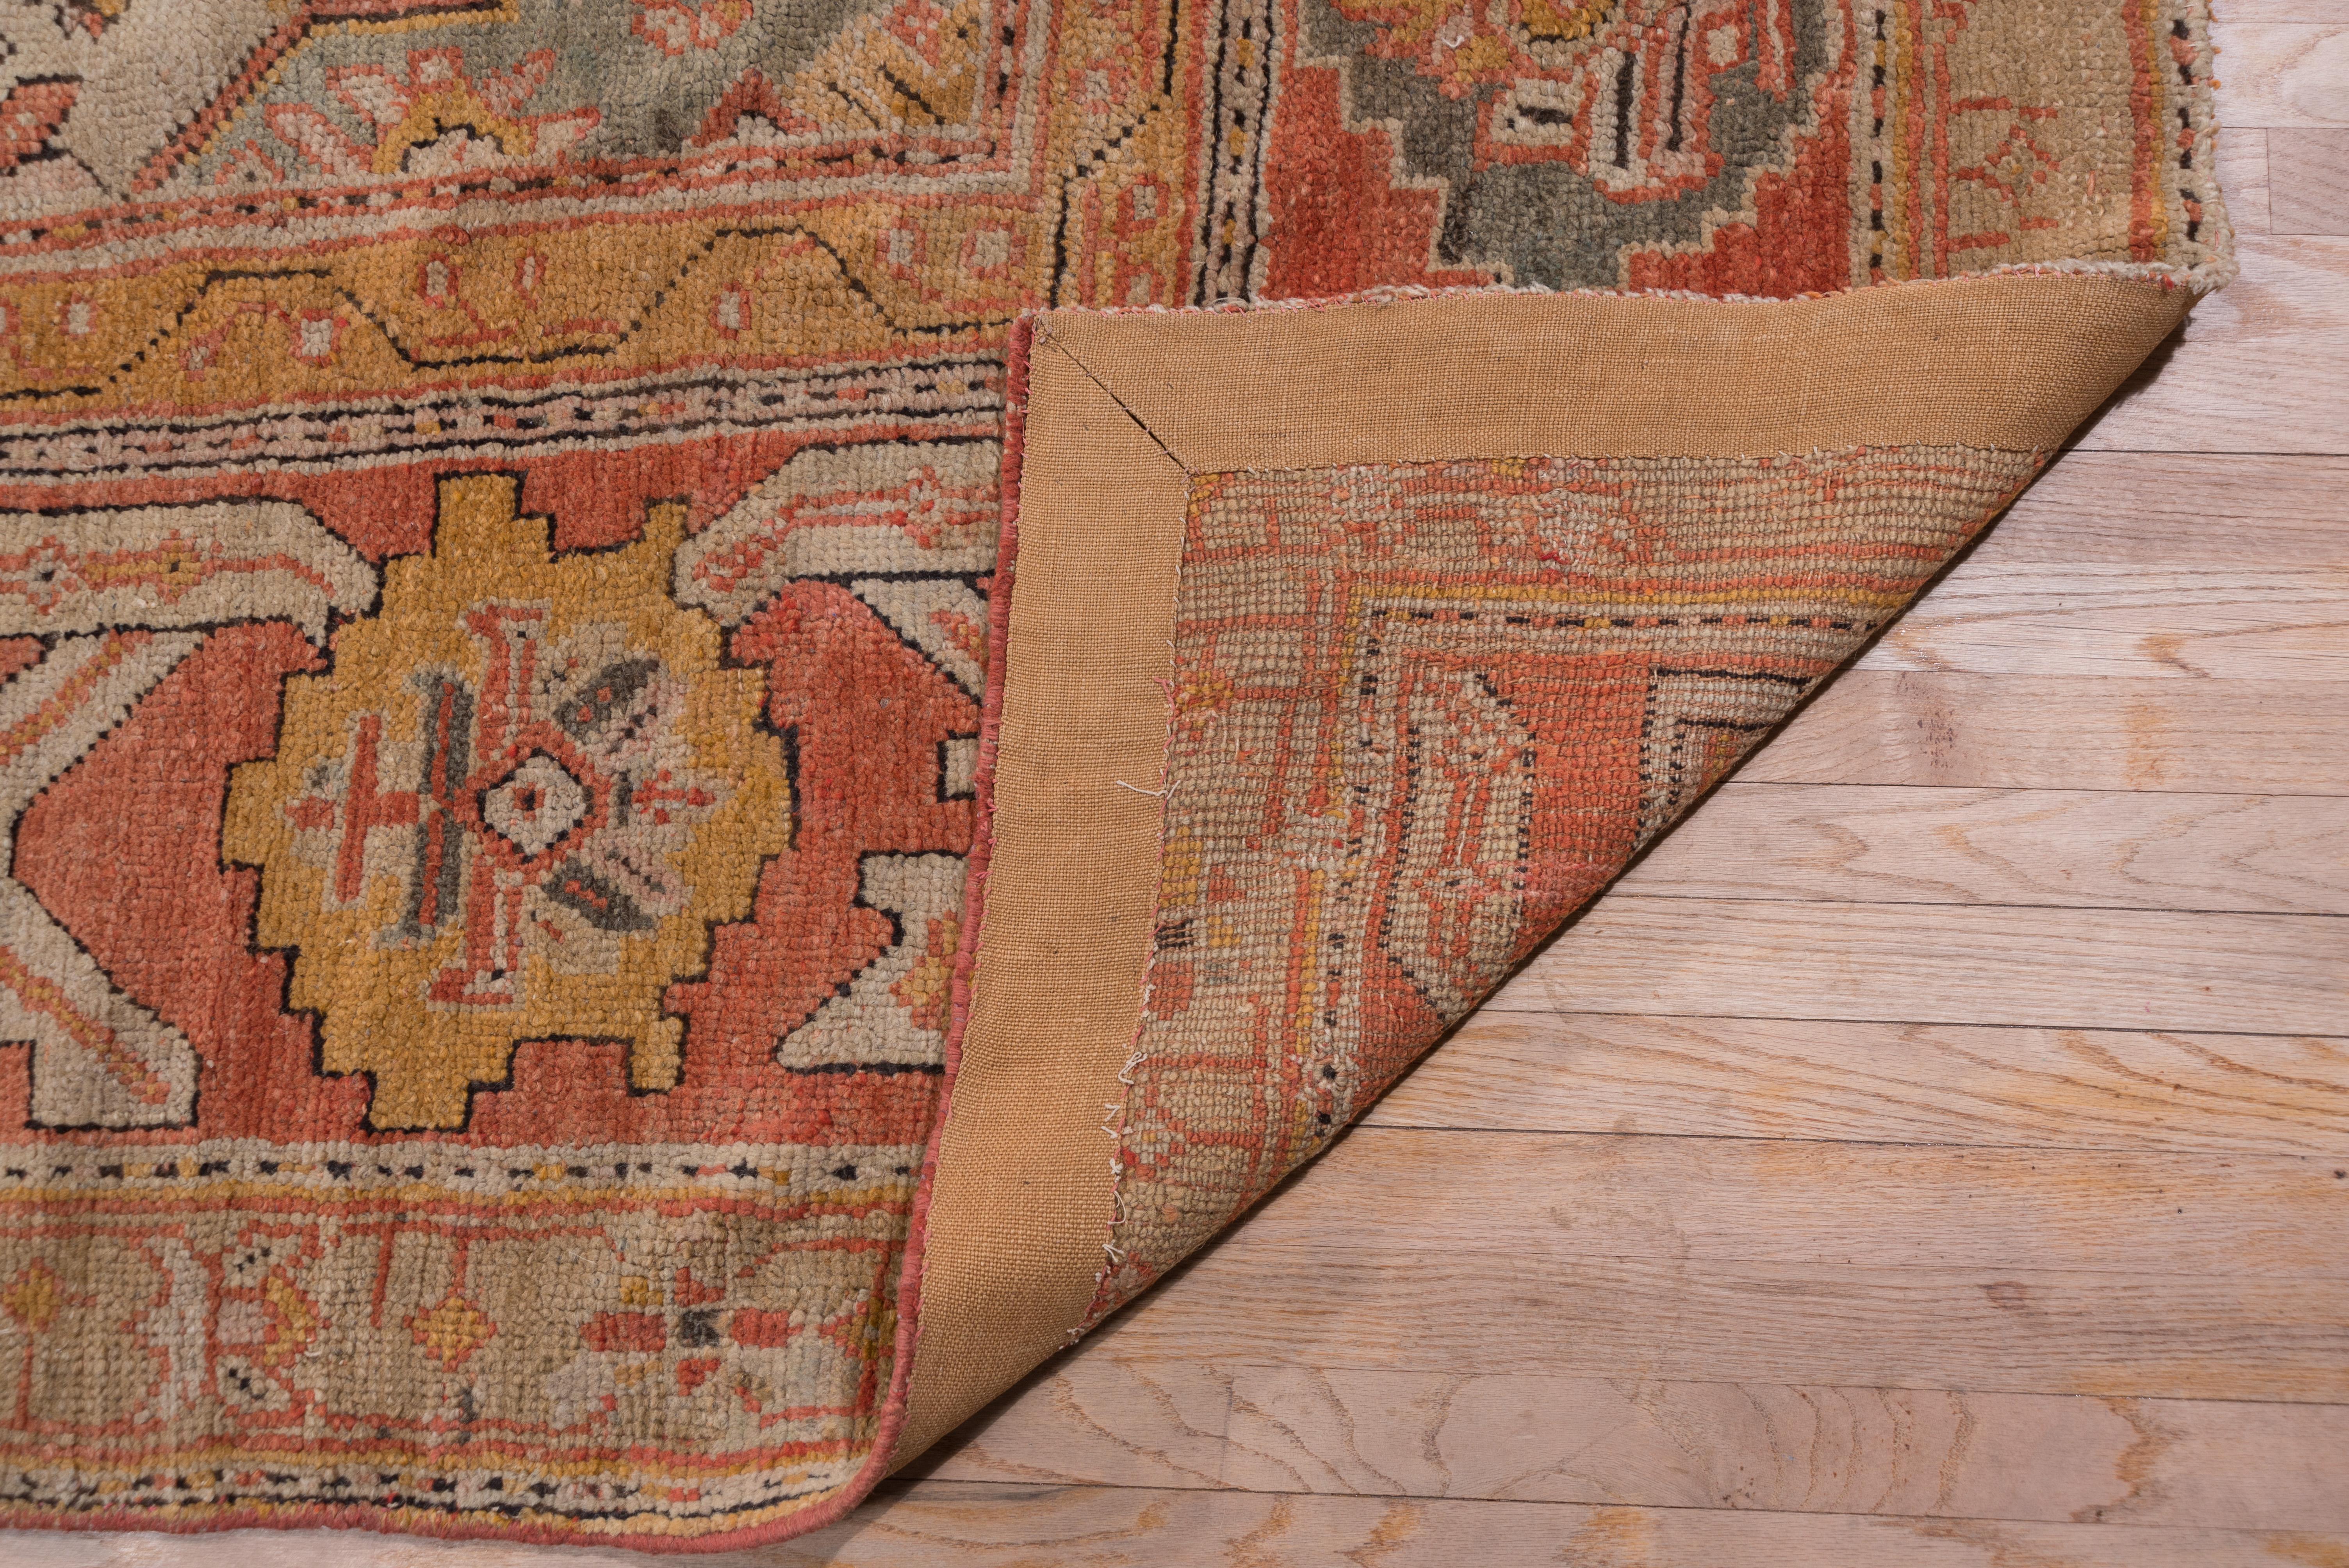 Incredible Antique Oushak Turkish Carpet, Amazing Colors, Allover Field, 1900s For Sale 5